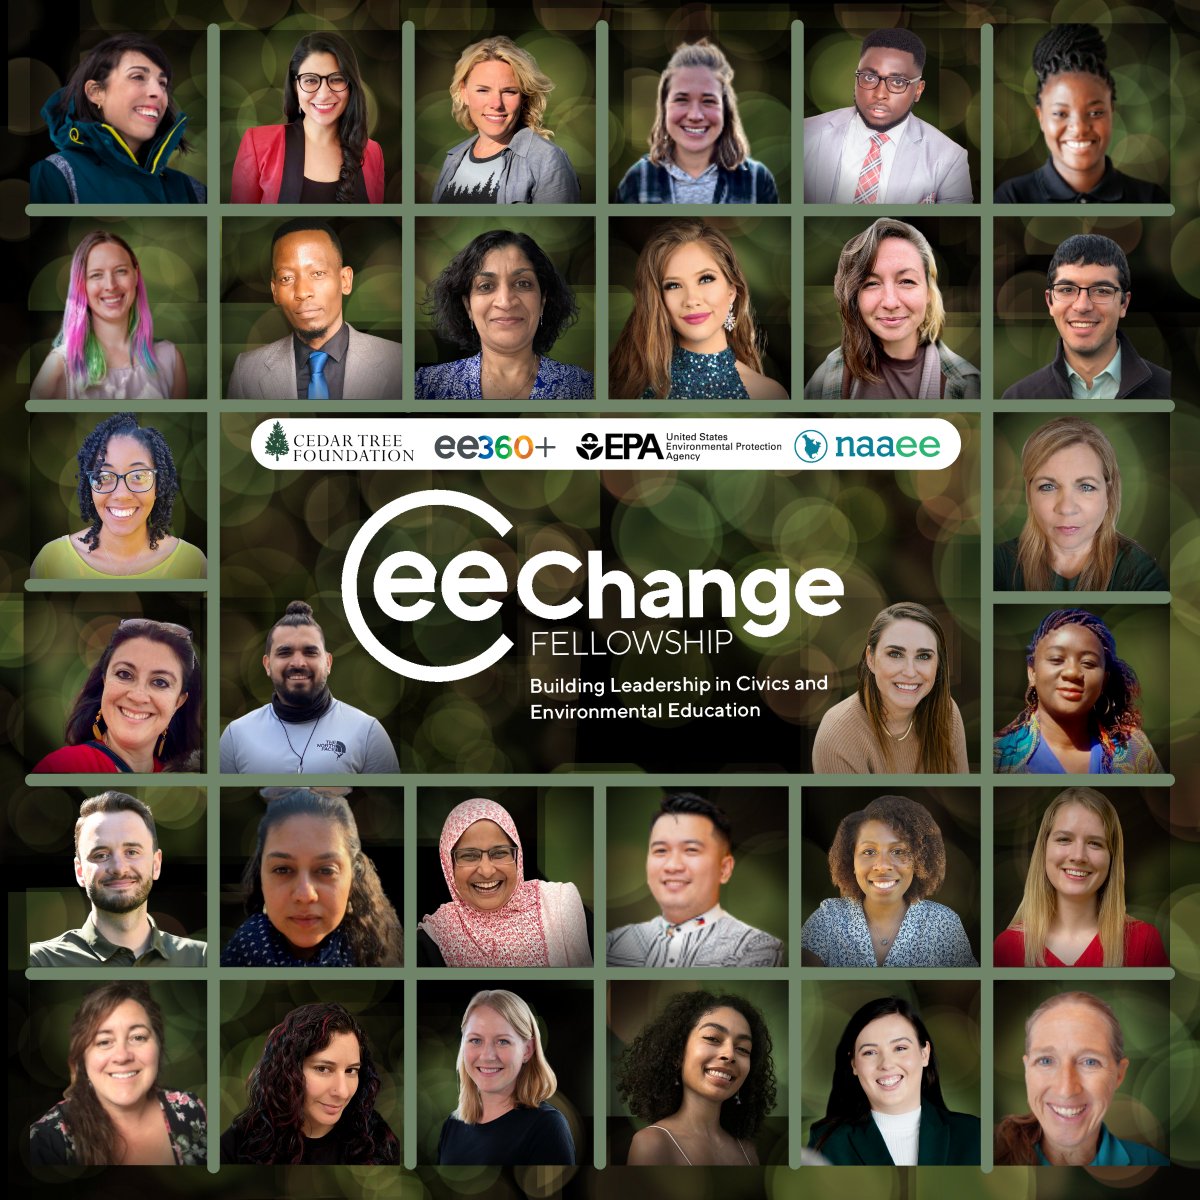 I’m excited to join @TheNAAEE 's  2023 CEE-Change Fellowship to help promote civic engagement & environmental responsibility in my community. This Fellowship is supported by ee360+, the U.S.@EPA , and Cedar Tree Foundation. Learn more: bit.ly/CEEChange #CEEChange #EnviroEd